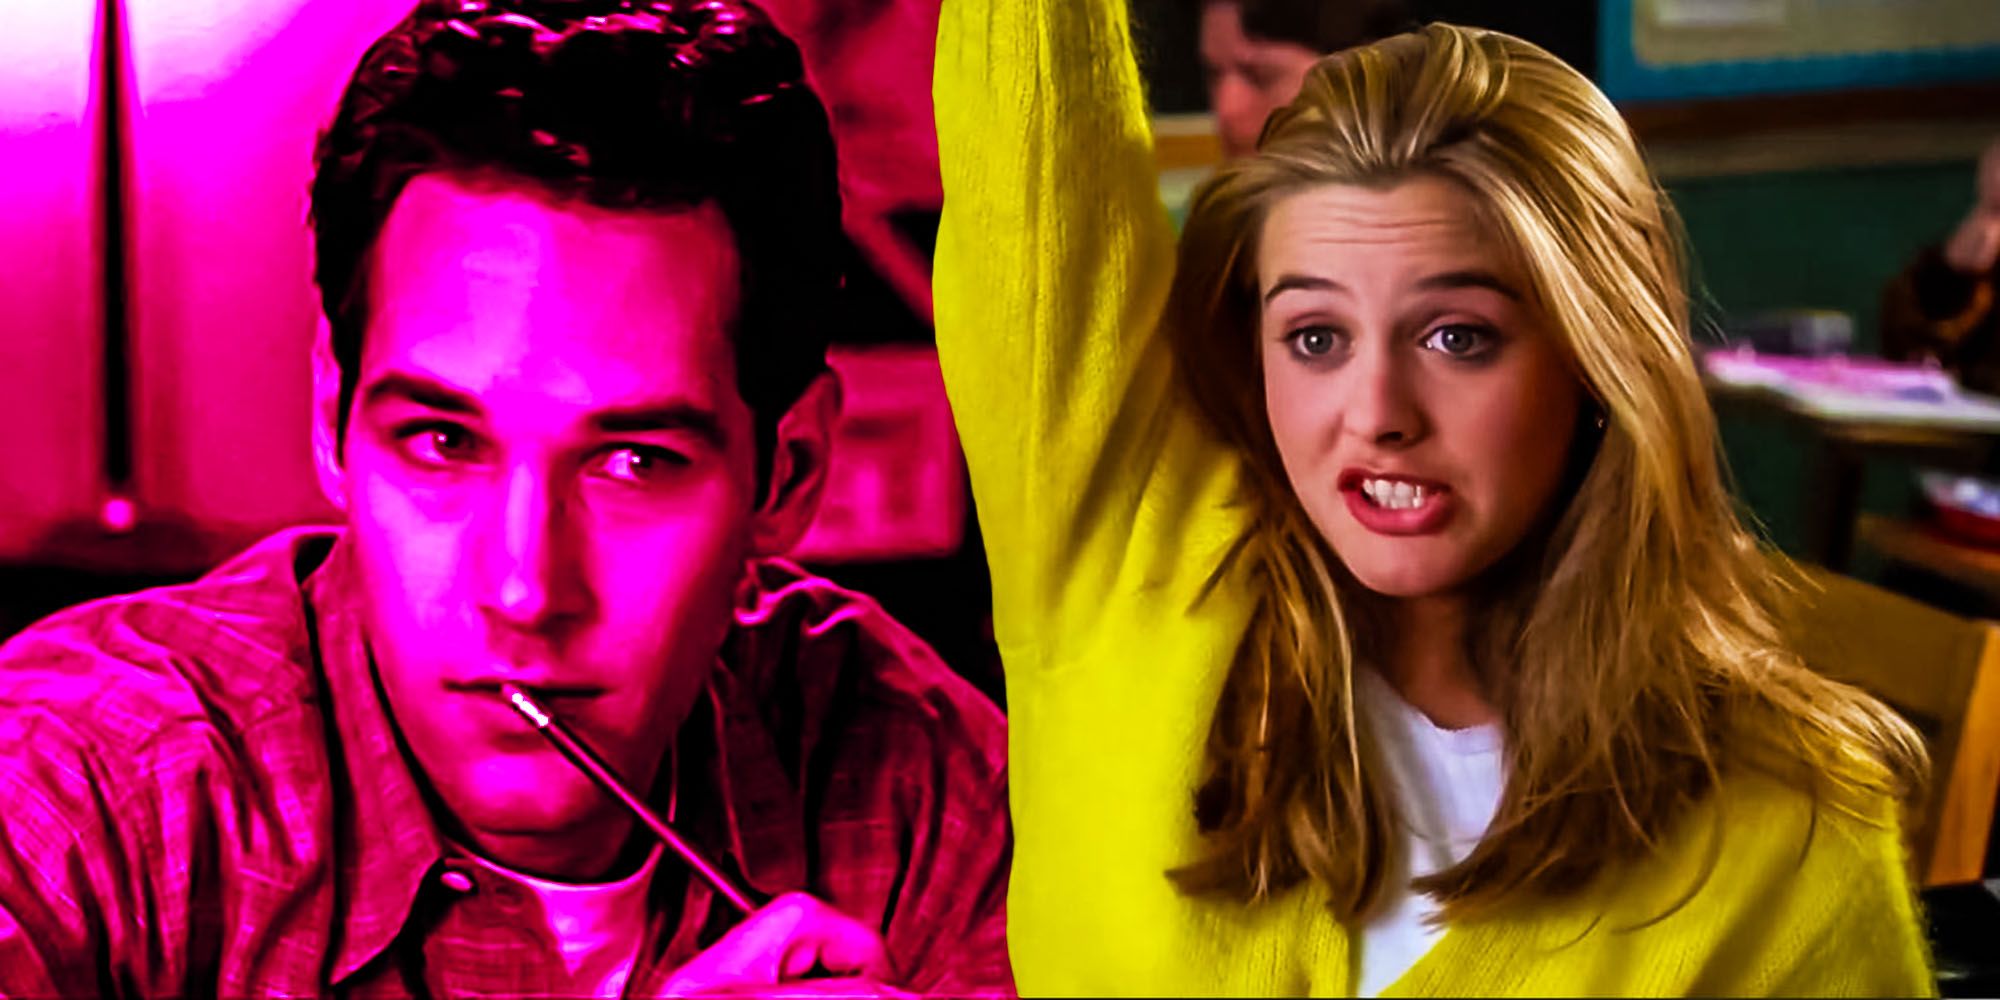 Clueless inspiration for Cher and Josh relaitonship